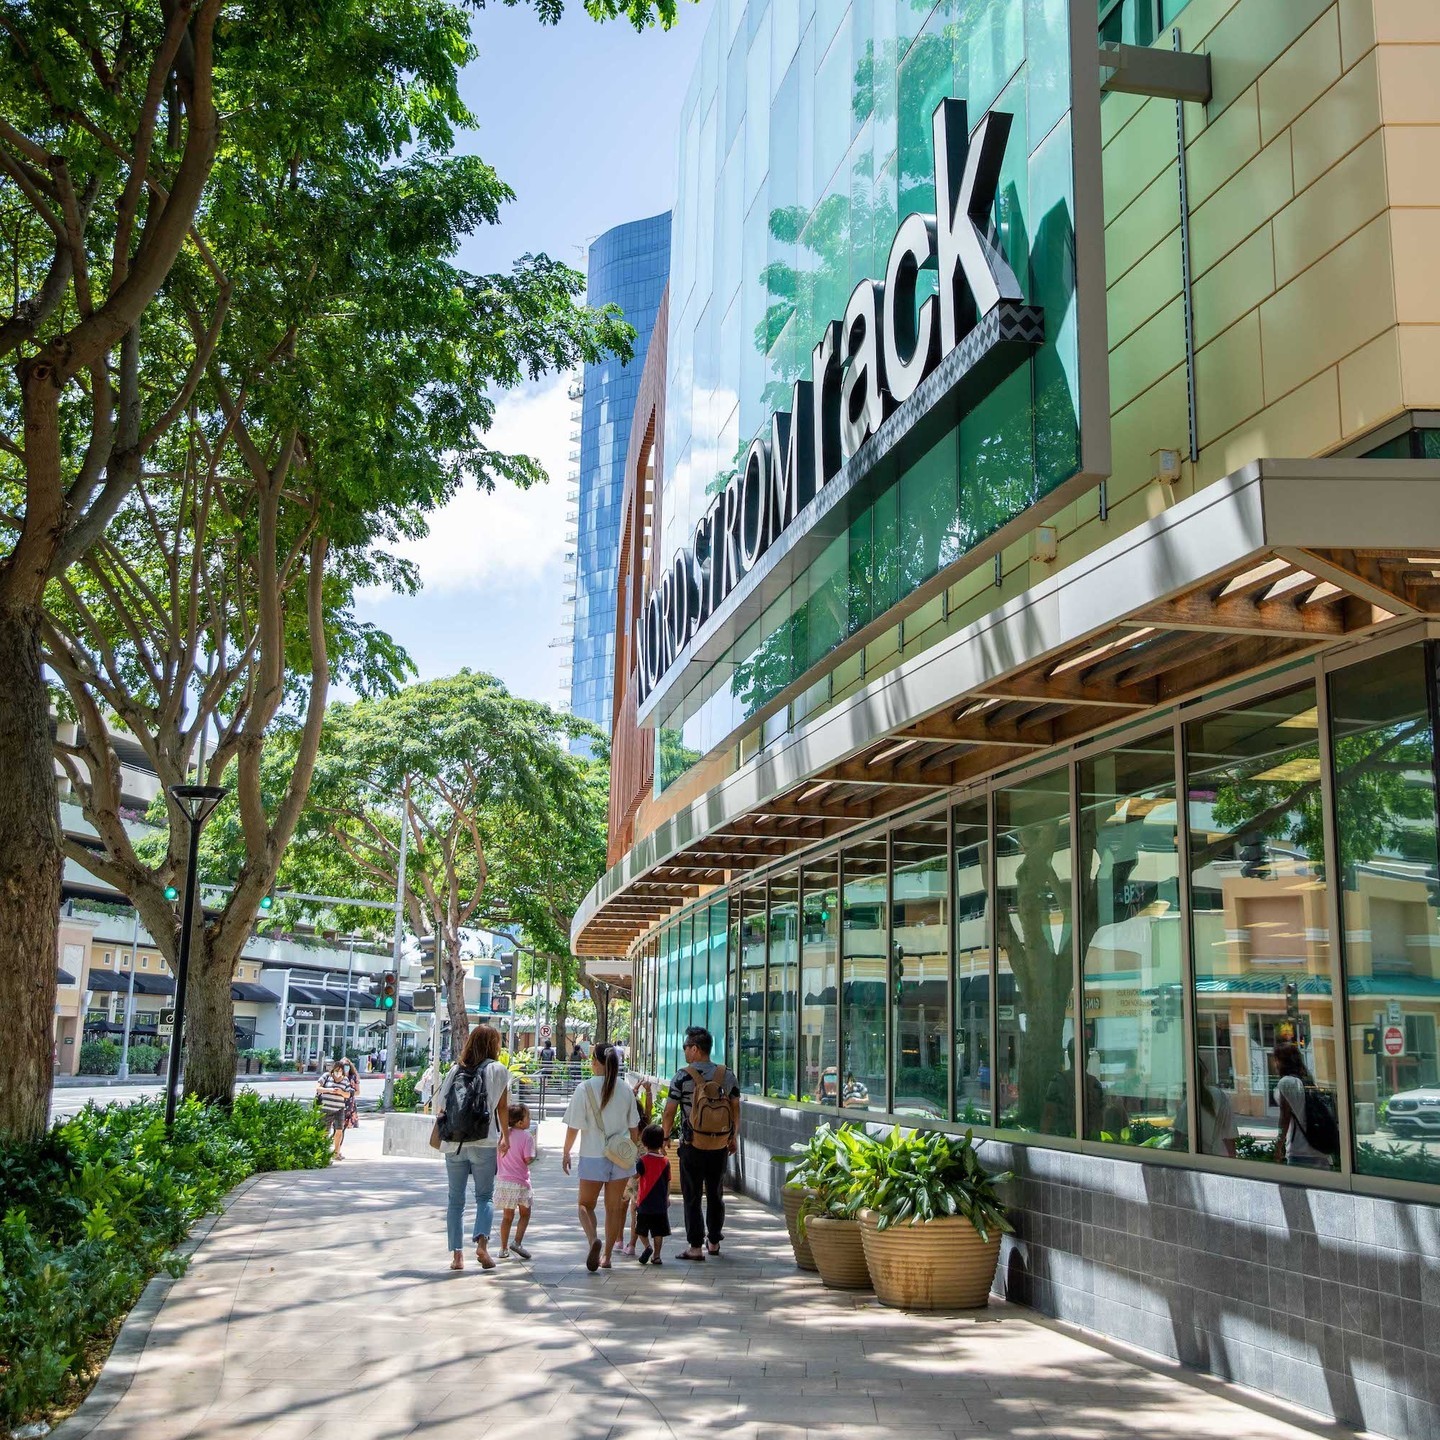 At Ward Village, enjoy an array of eateries with indoor and alfresco dining options, discover a variety of local and national shops, and unwind at your favorite neighborhood park. With free parking at our three separate shopping districts, you can easily explore the neighborhood.